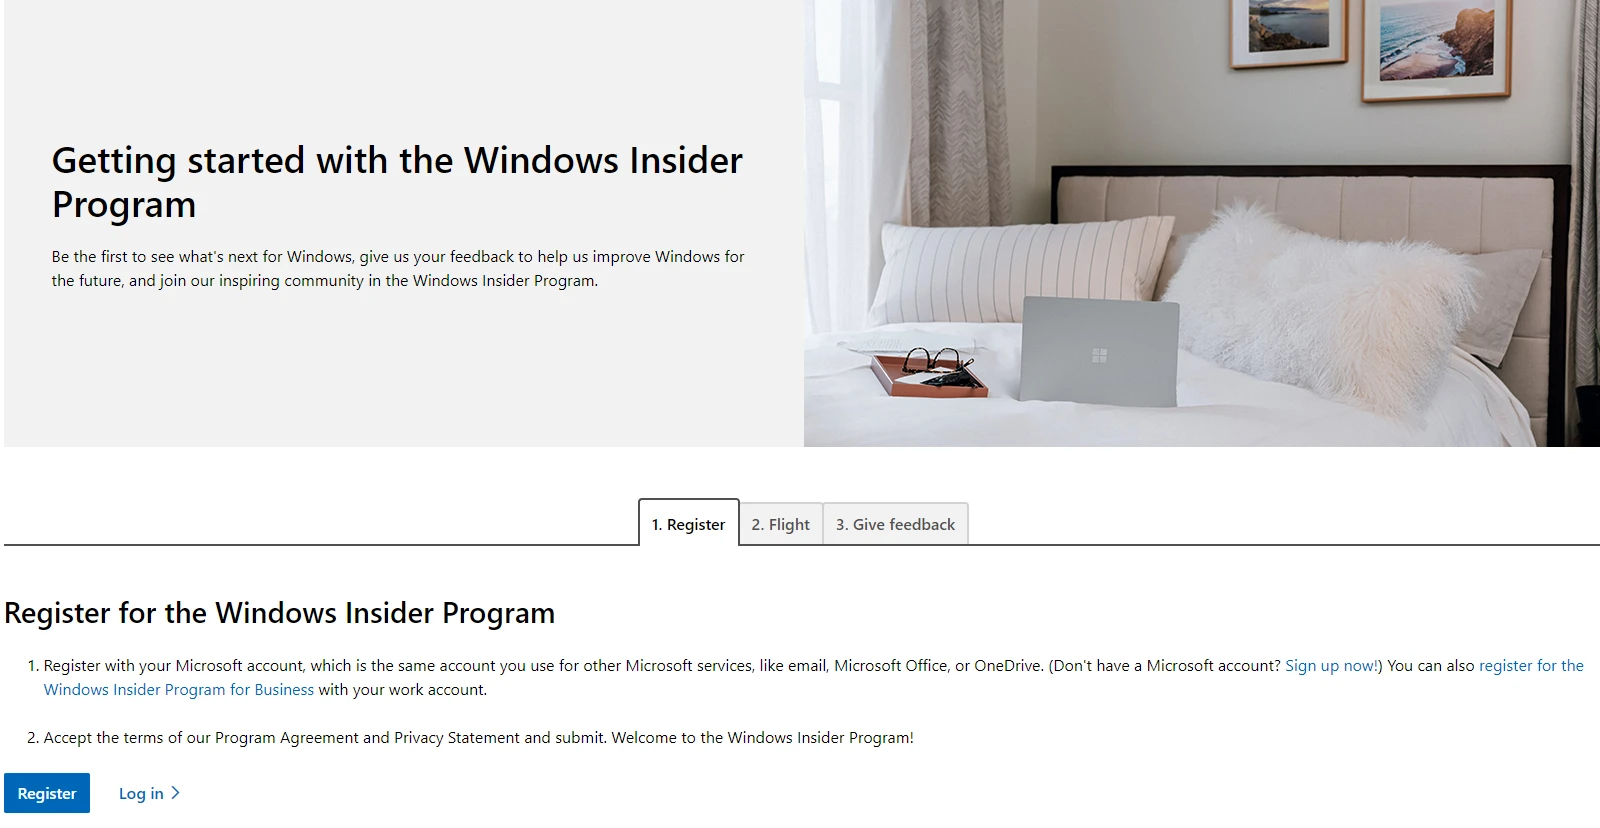 Getting started with the Windows Insider Program